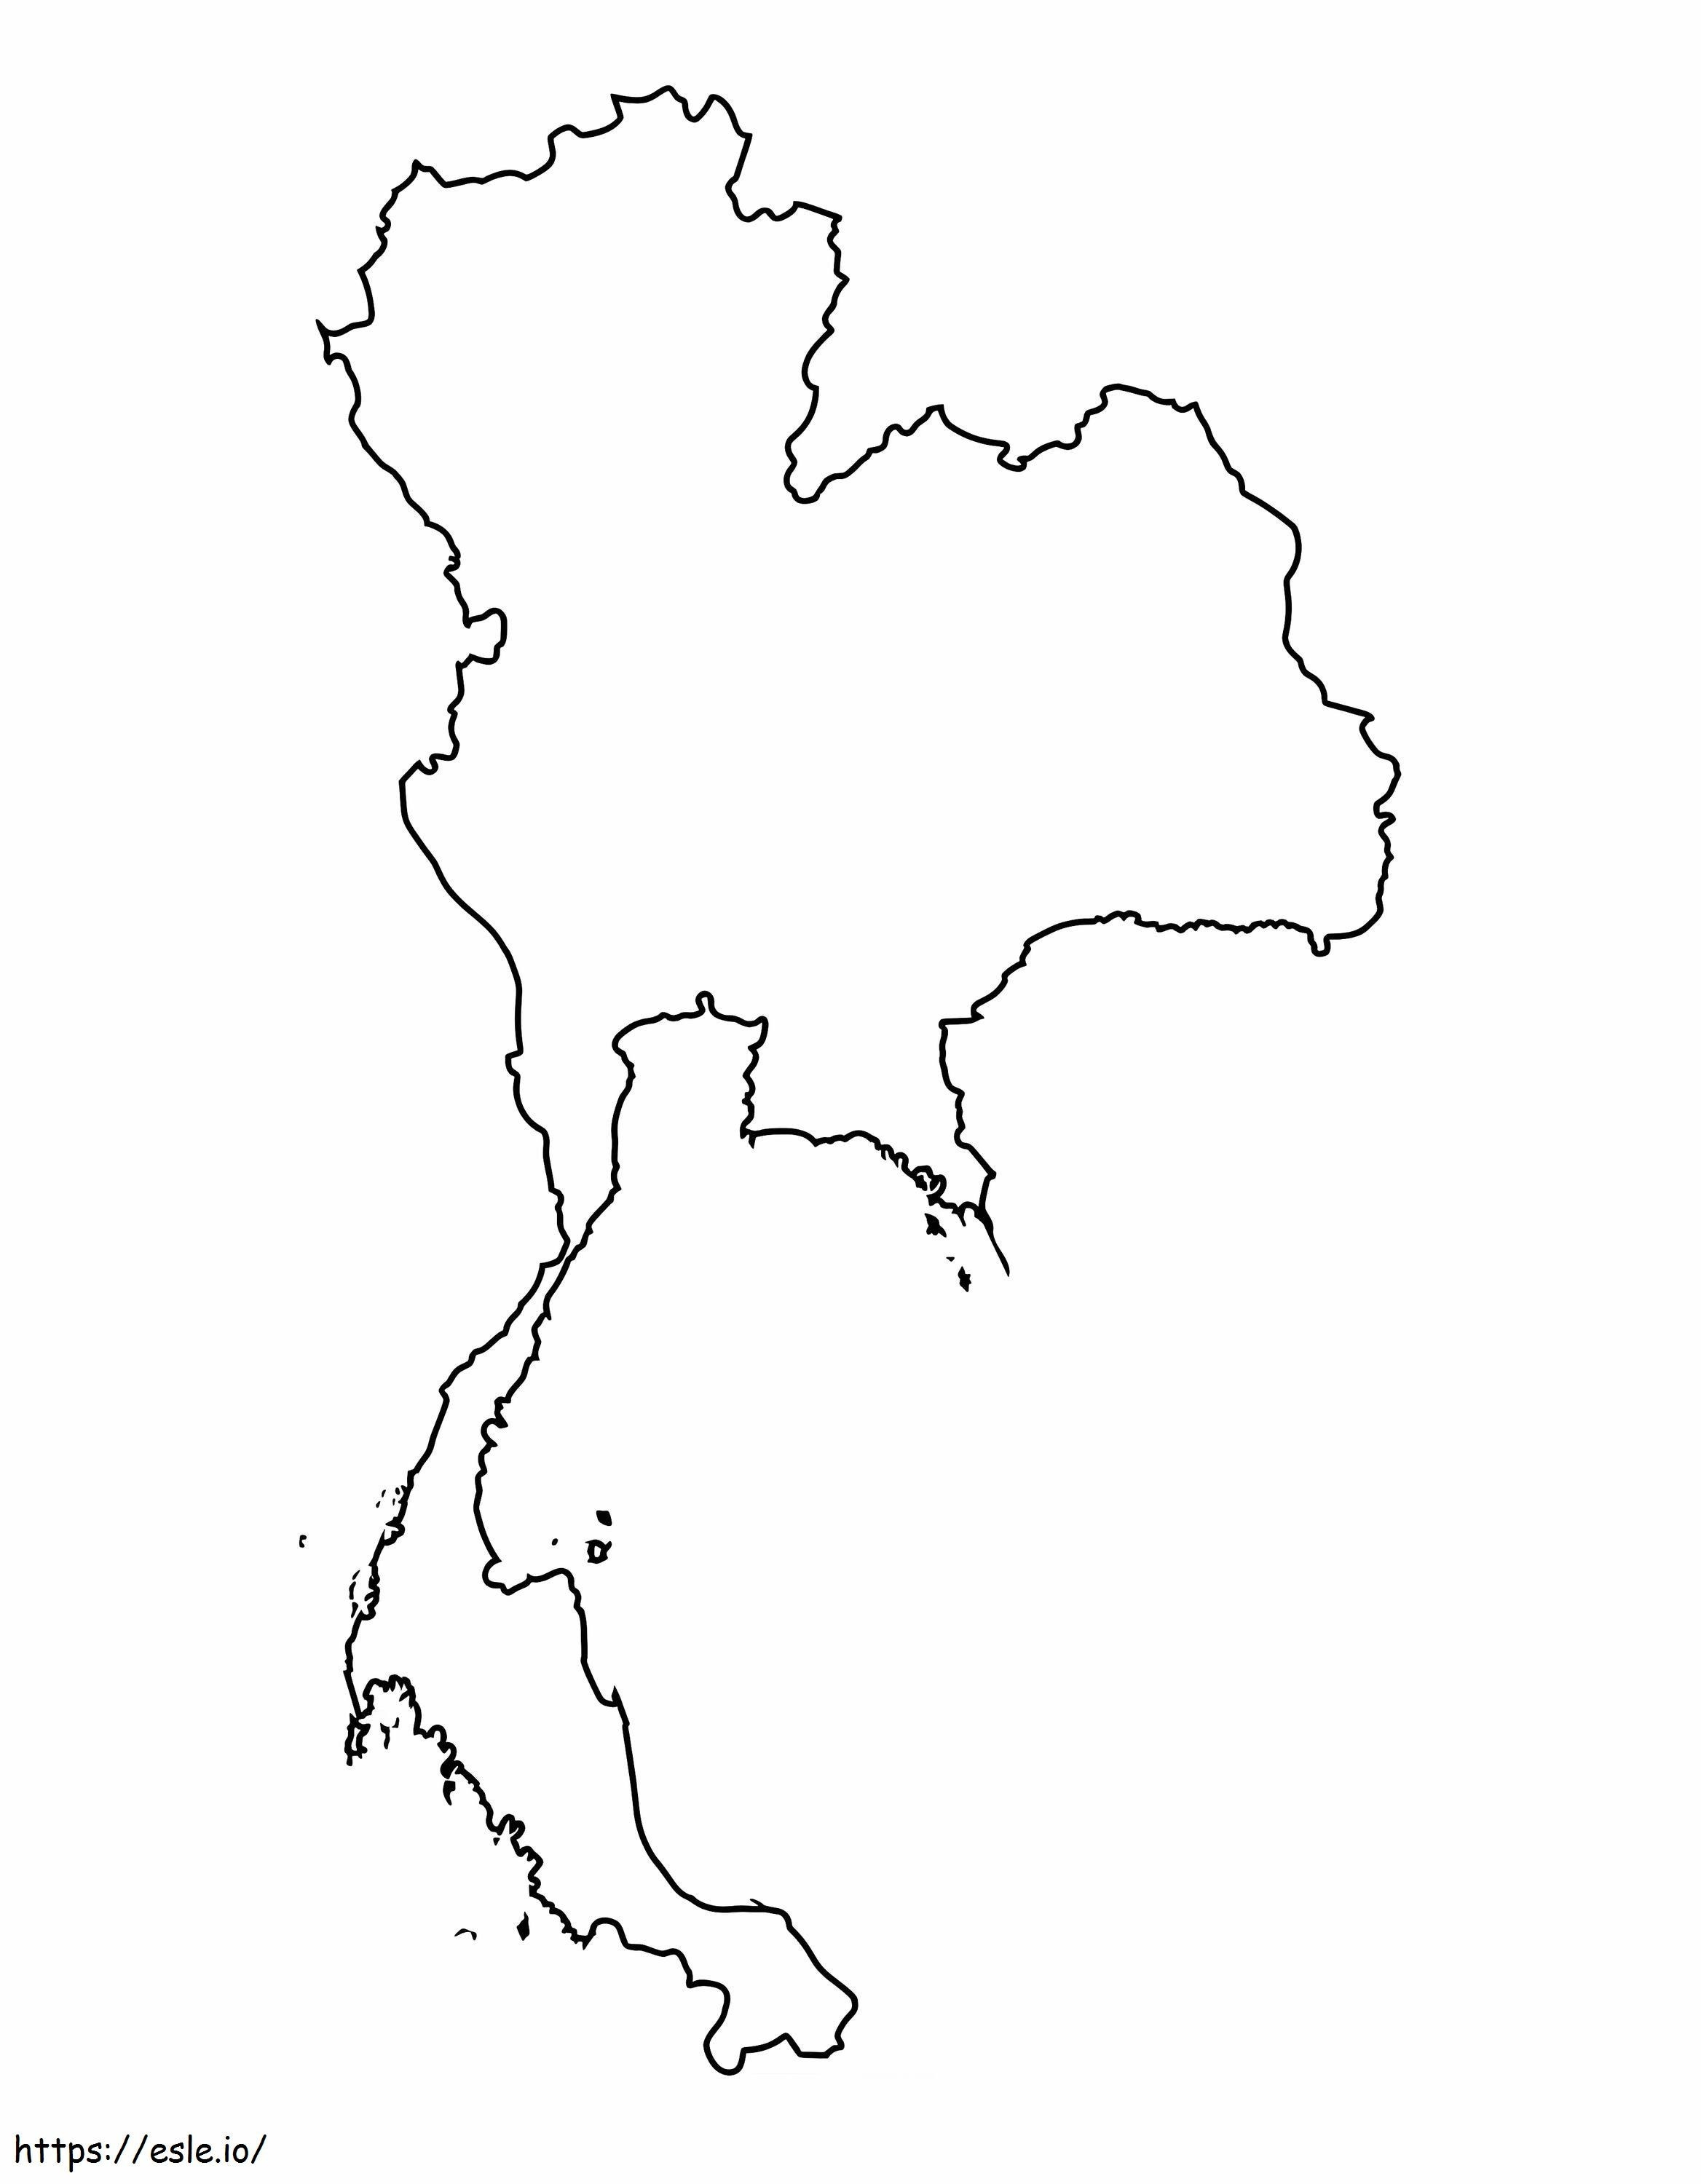 Thailand Outline Map coloring page